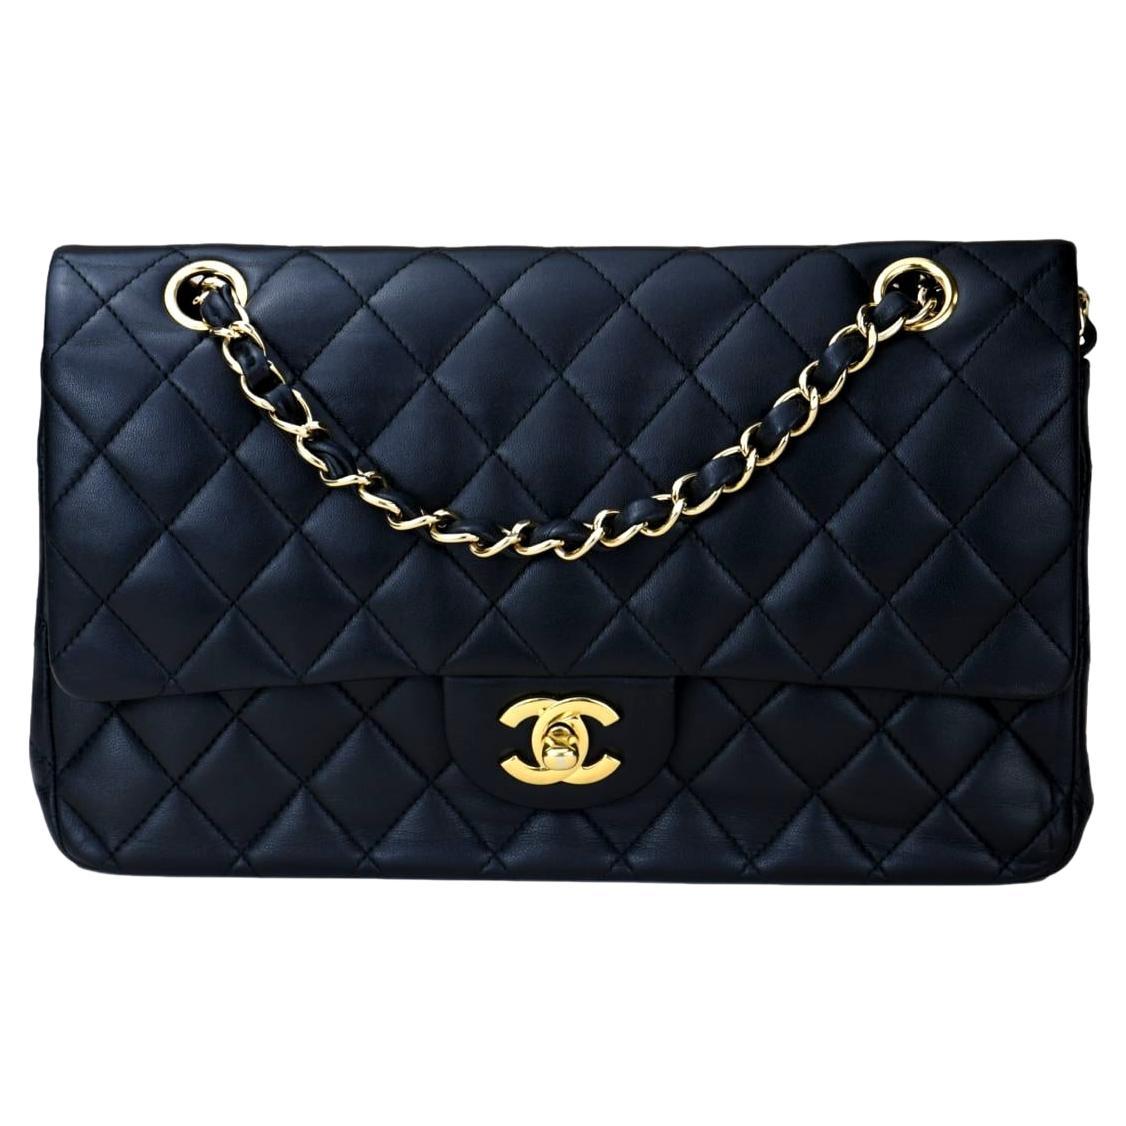 CHANEL Black Quilted Lambskin Timeless Classic Medium Double Flap